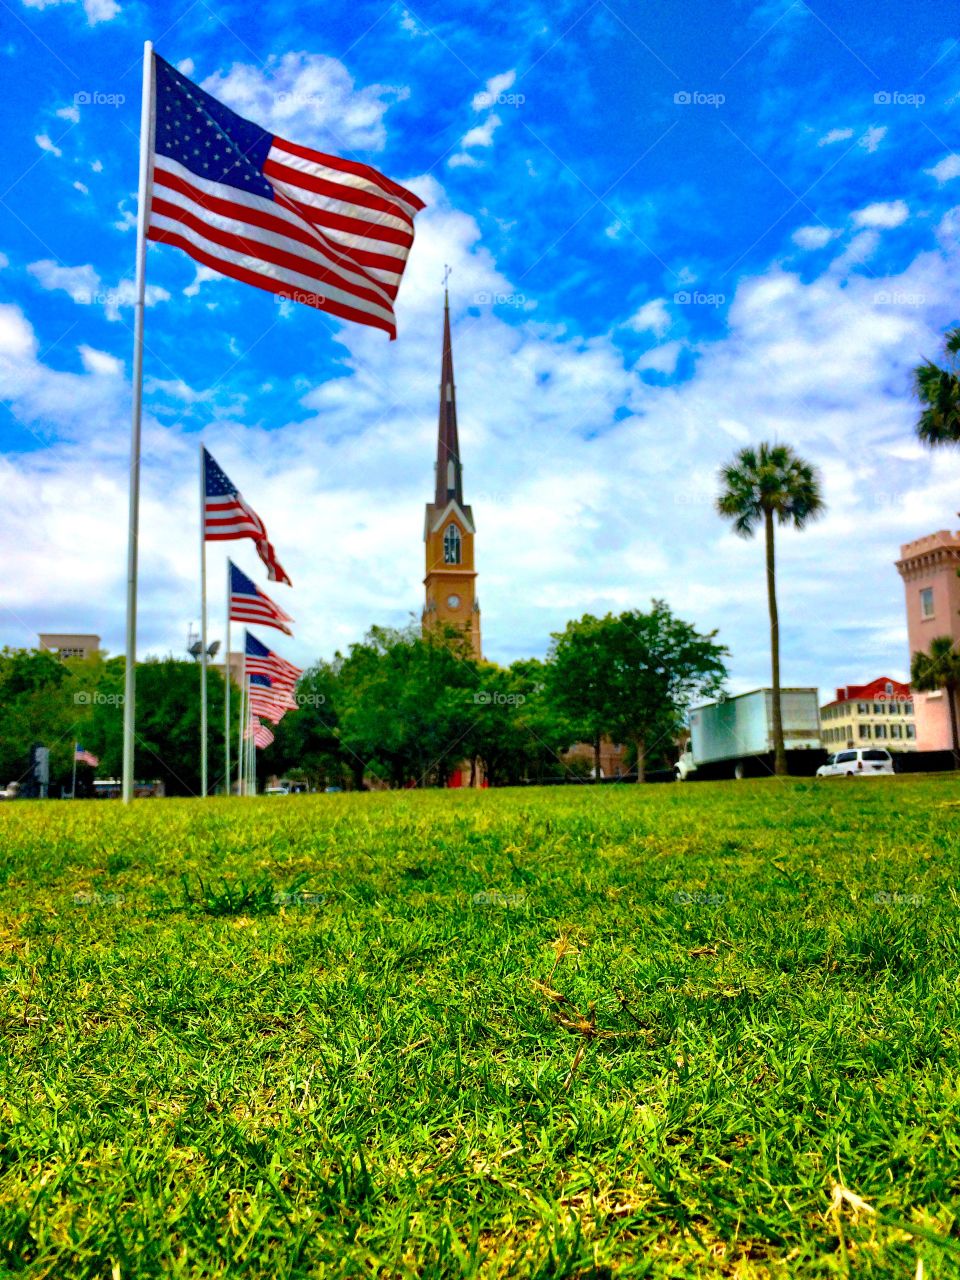 Holy City Memorial Day. Taken at Marion Square in Charleston, SC on Memorial Day 2015